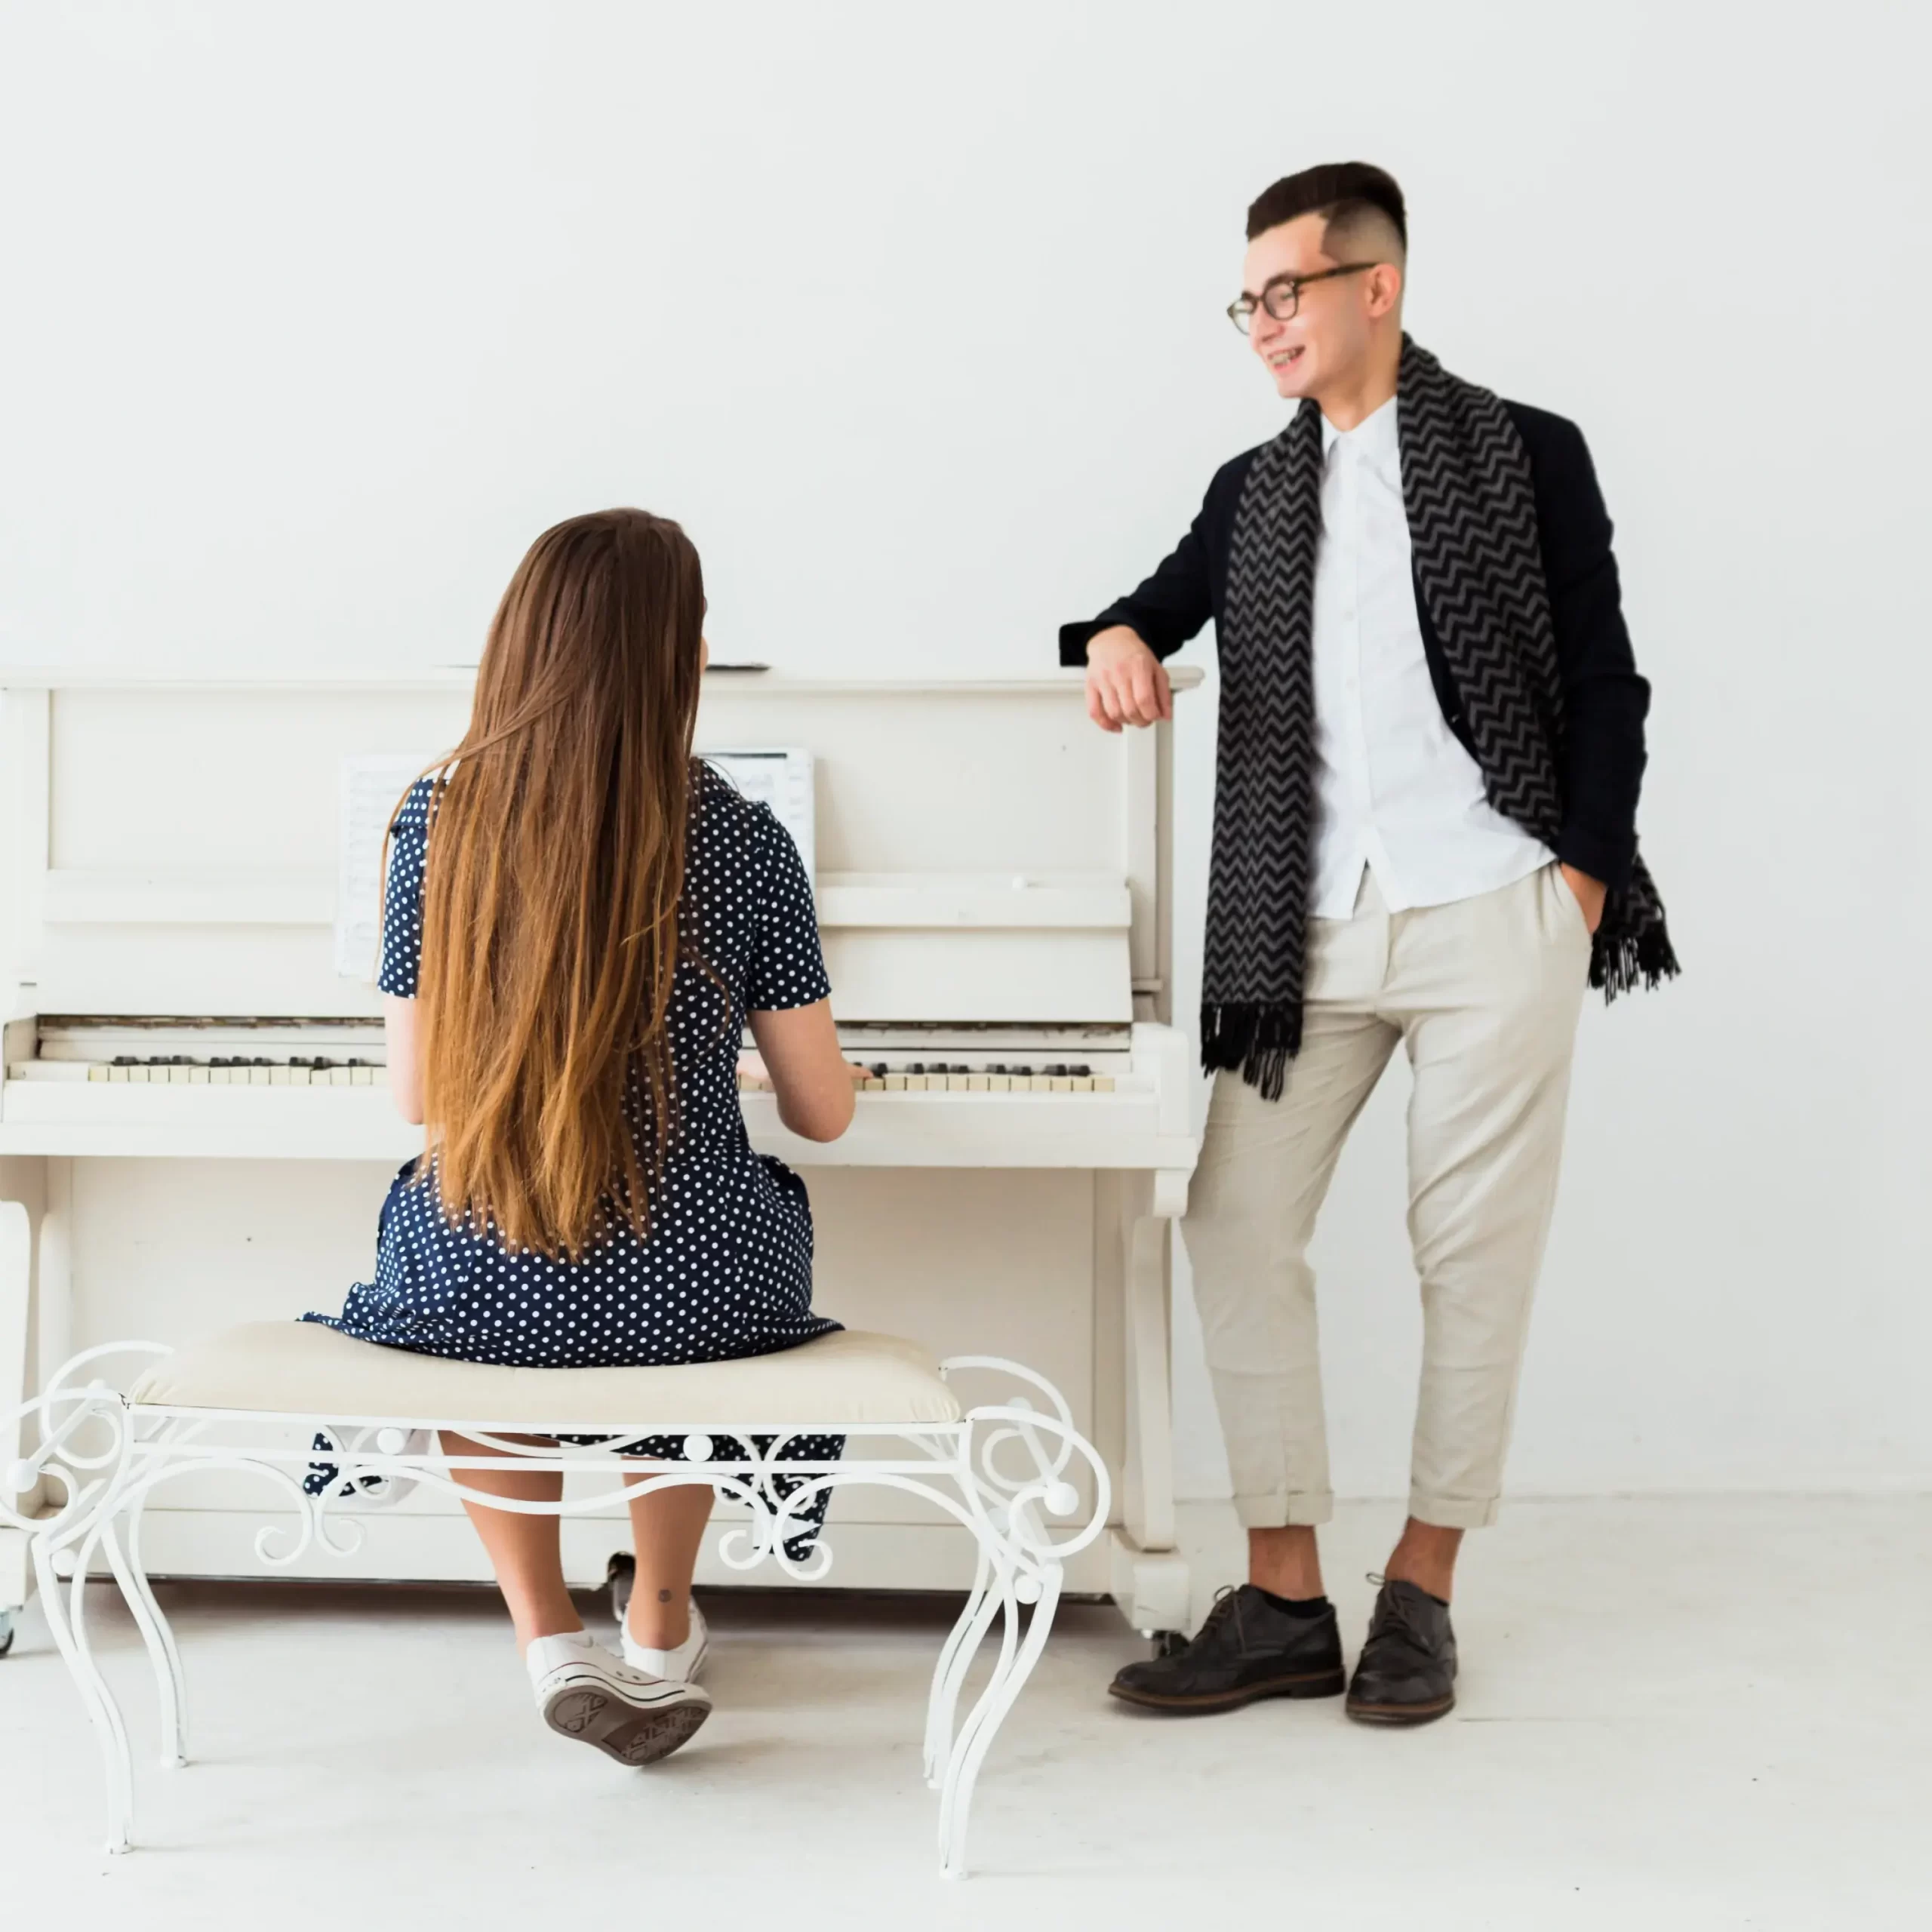 Piano Lessons for Beginners